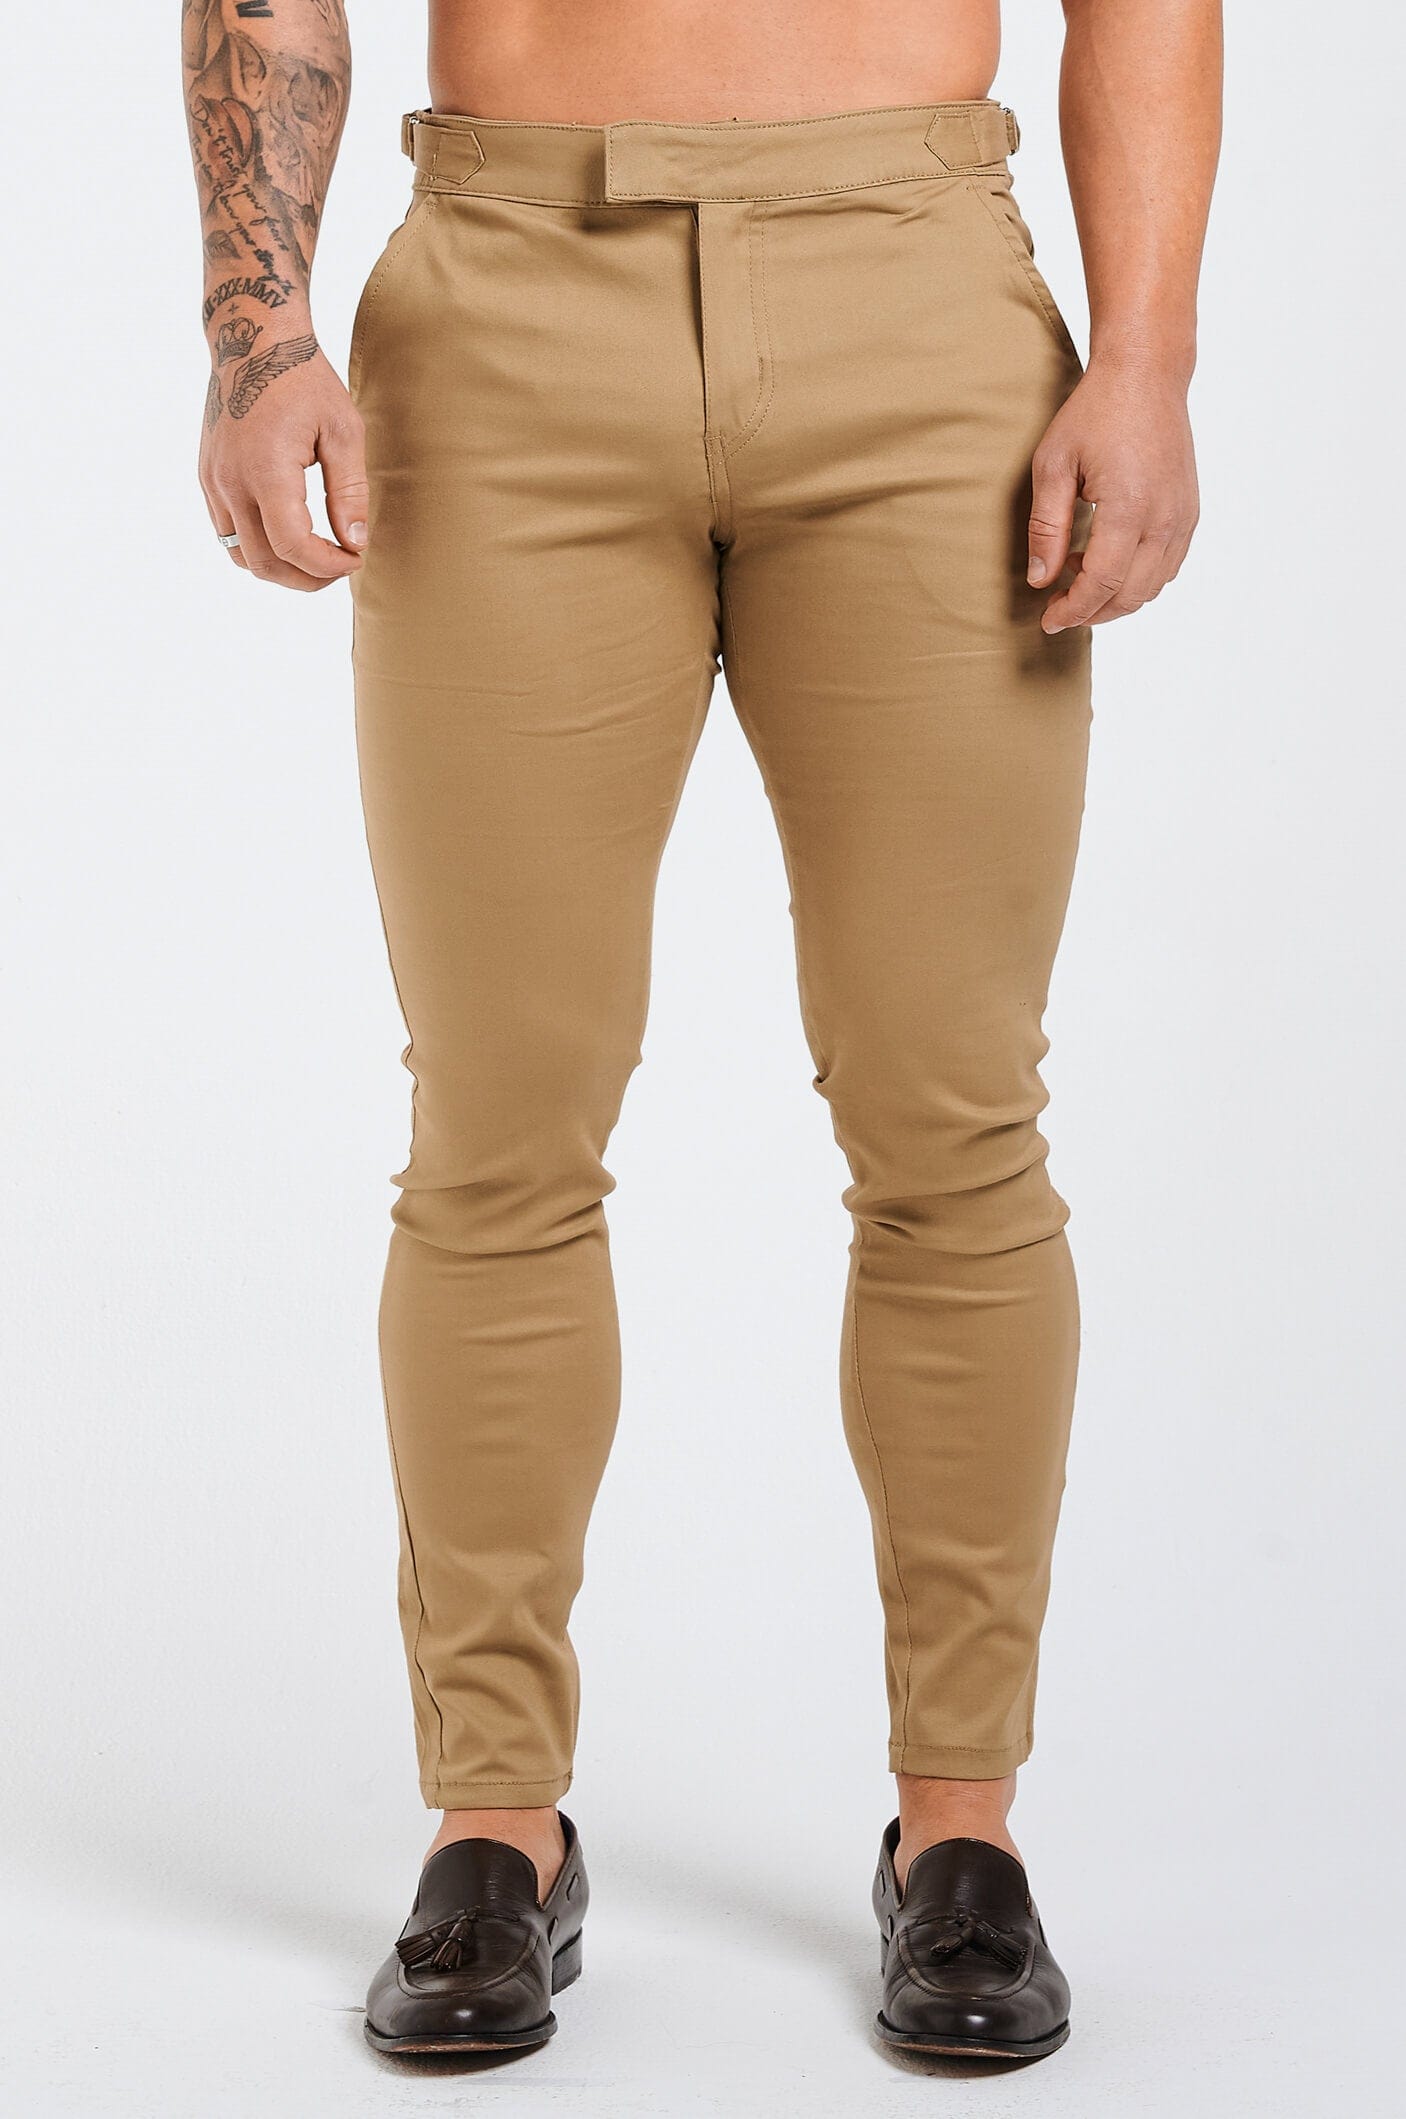 Legend London Trouser SLIM FIT HIGH WAISTED TROUSER - TAUPE